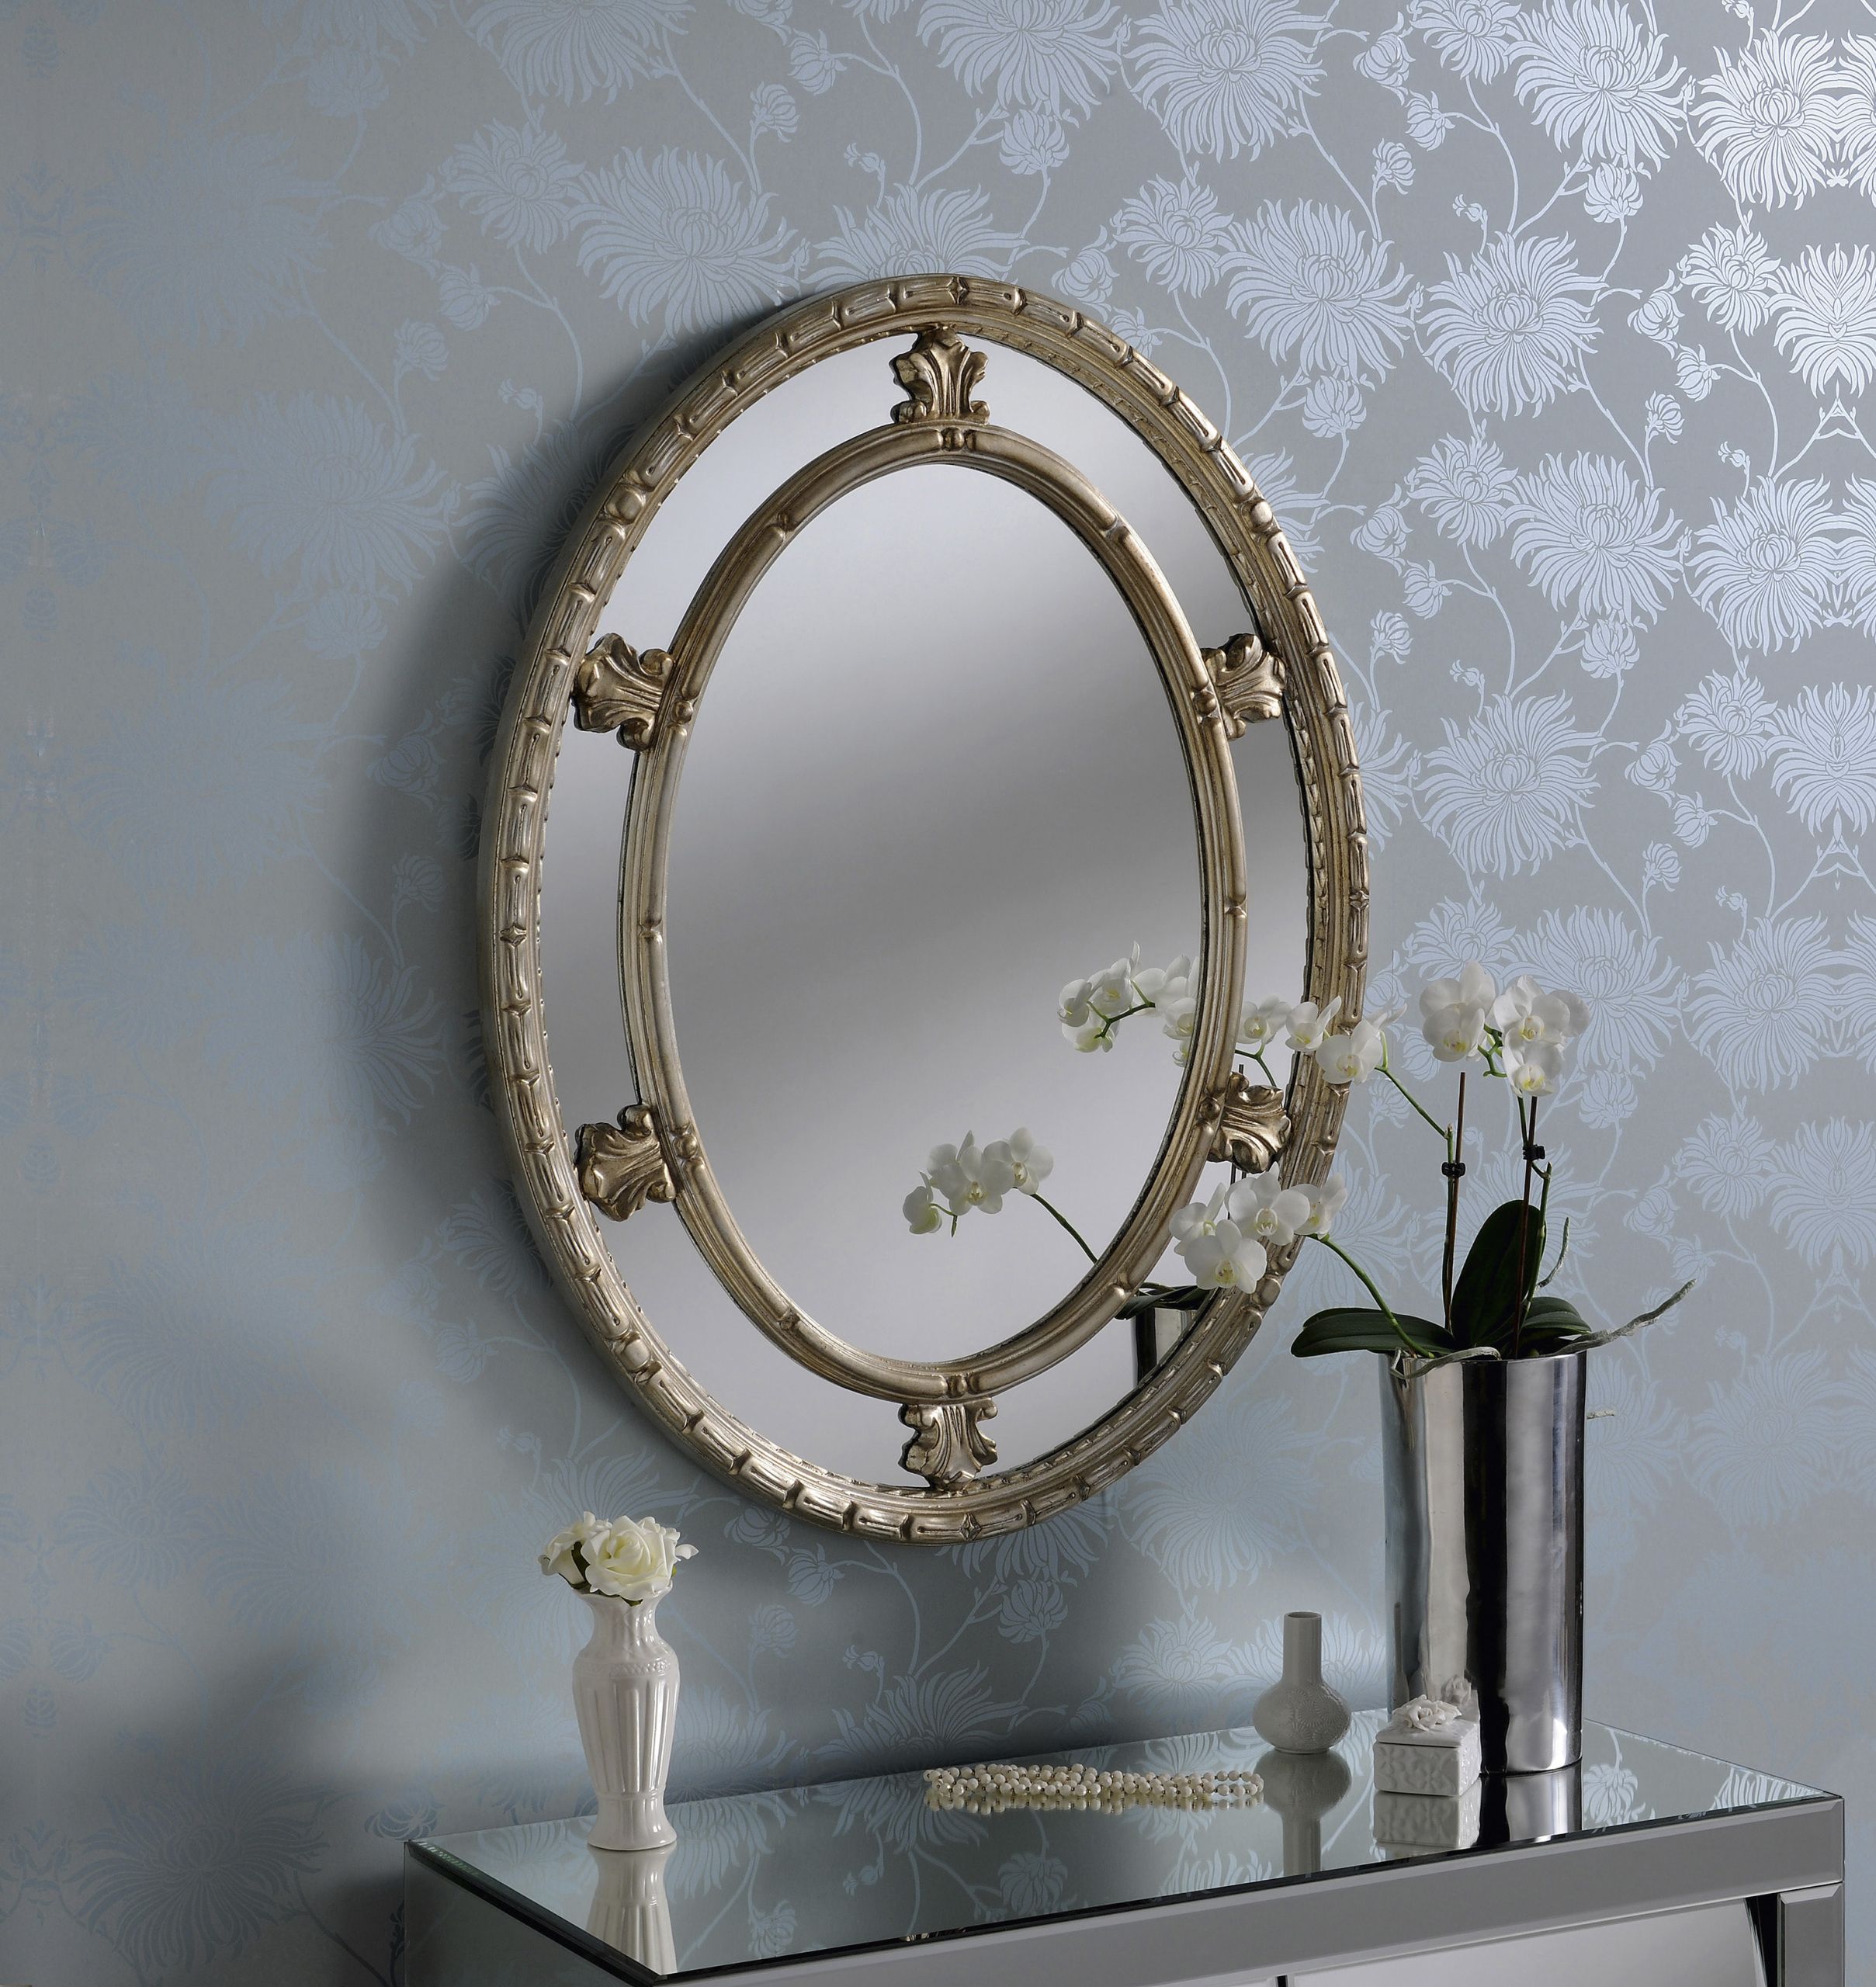 Art73 Gold Decorative Large Oval Wall Mirror Overmantle Hallway Or Throughout Oval Wide Lip Wall Mirrors (View 1 of 15)